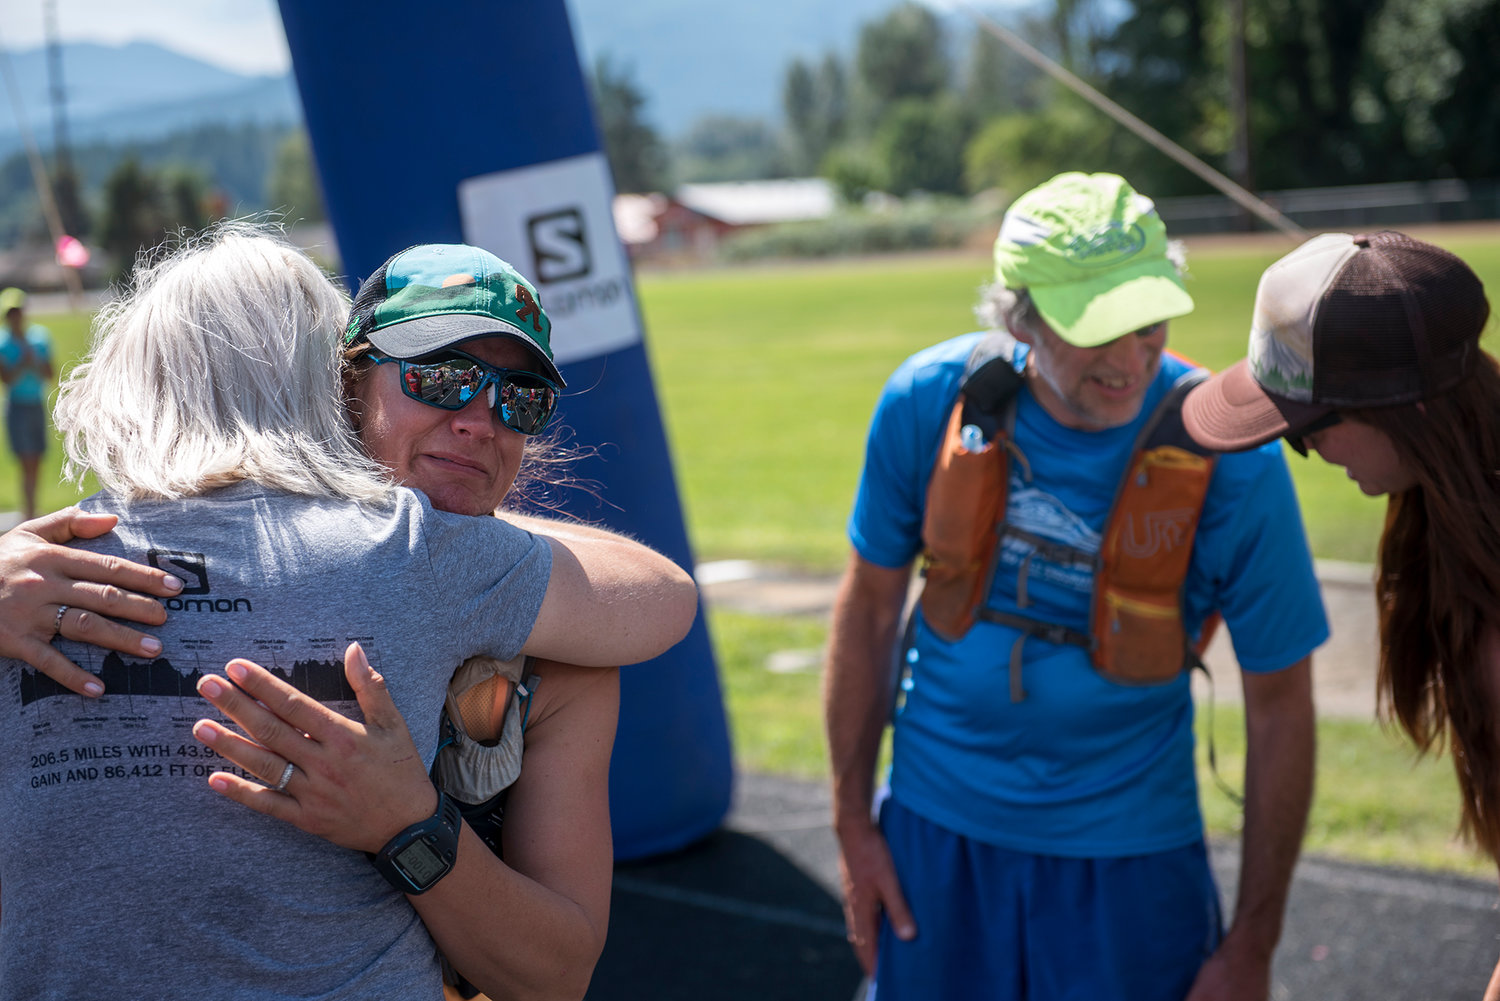 Angela Wilder of Mcleary (left with glasses) gets a hug after crossing the Bigfoot 200 finish line at White Pass High School on Tuesday afternoon. Wilder crossed the finish line with Dan Saul of Olympia (green hat) who was greeted on the track by race coordinator Candice Burt (far right).